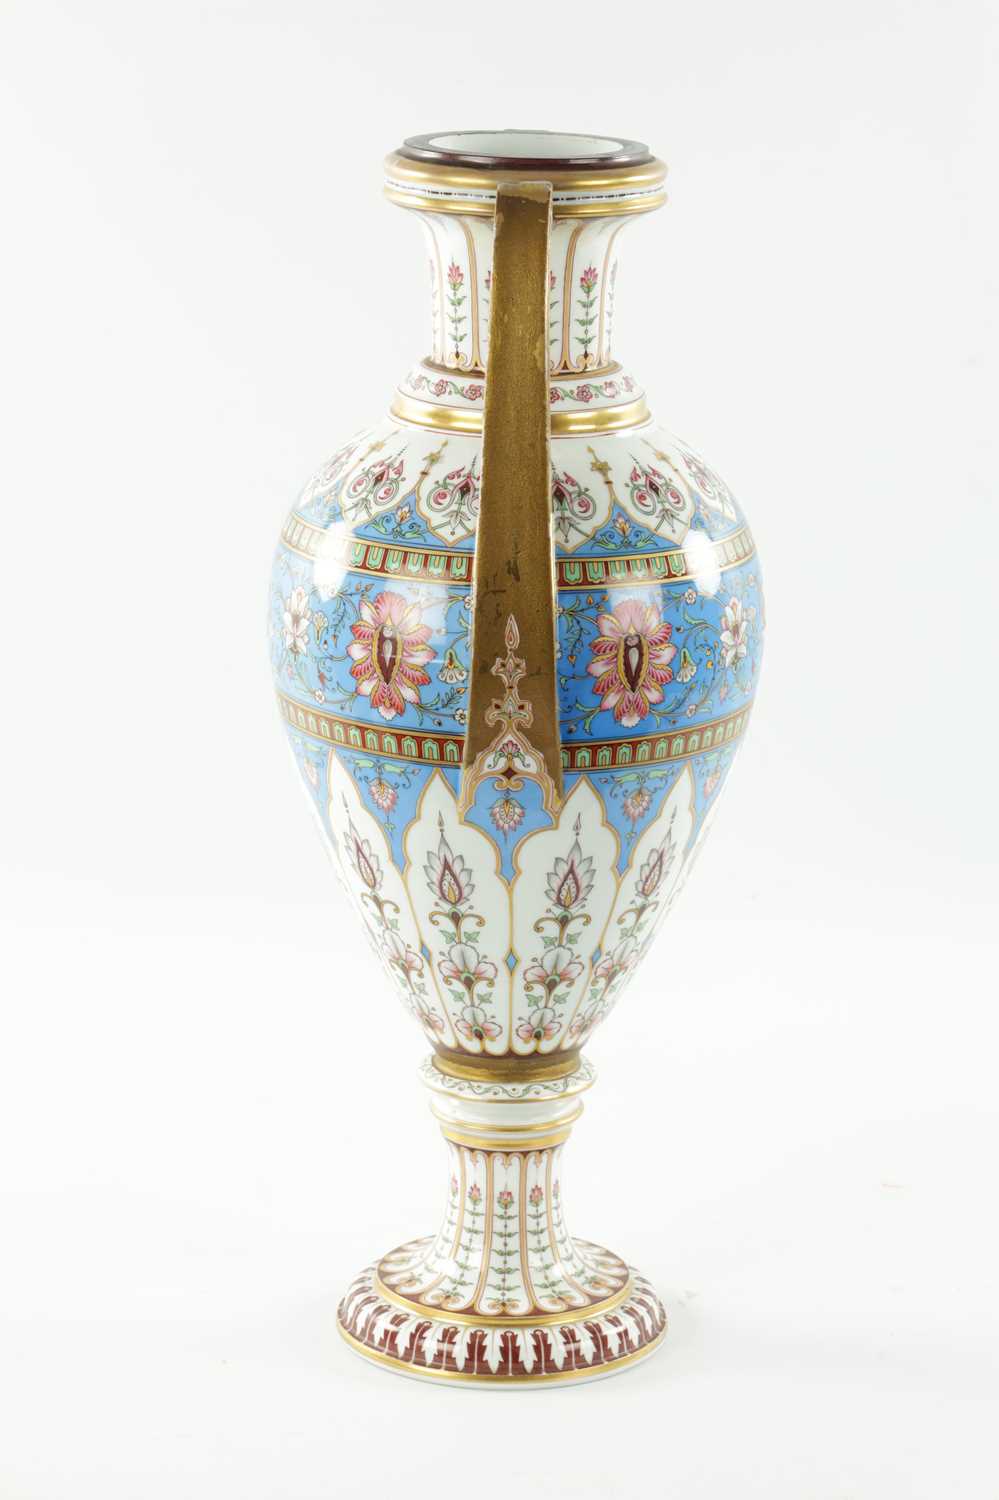 A LARGE LATE 19TH CENTURY PORCELAIN VASE POSSIBLY RUSSIAN - Image 6 of 8